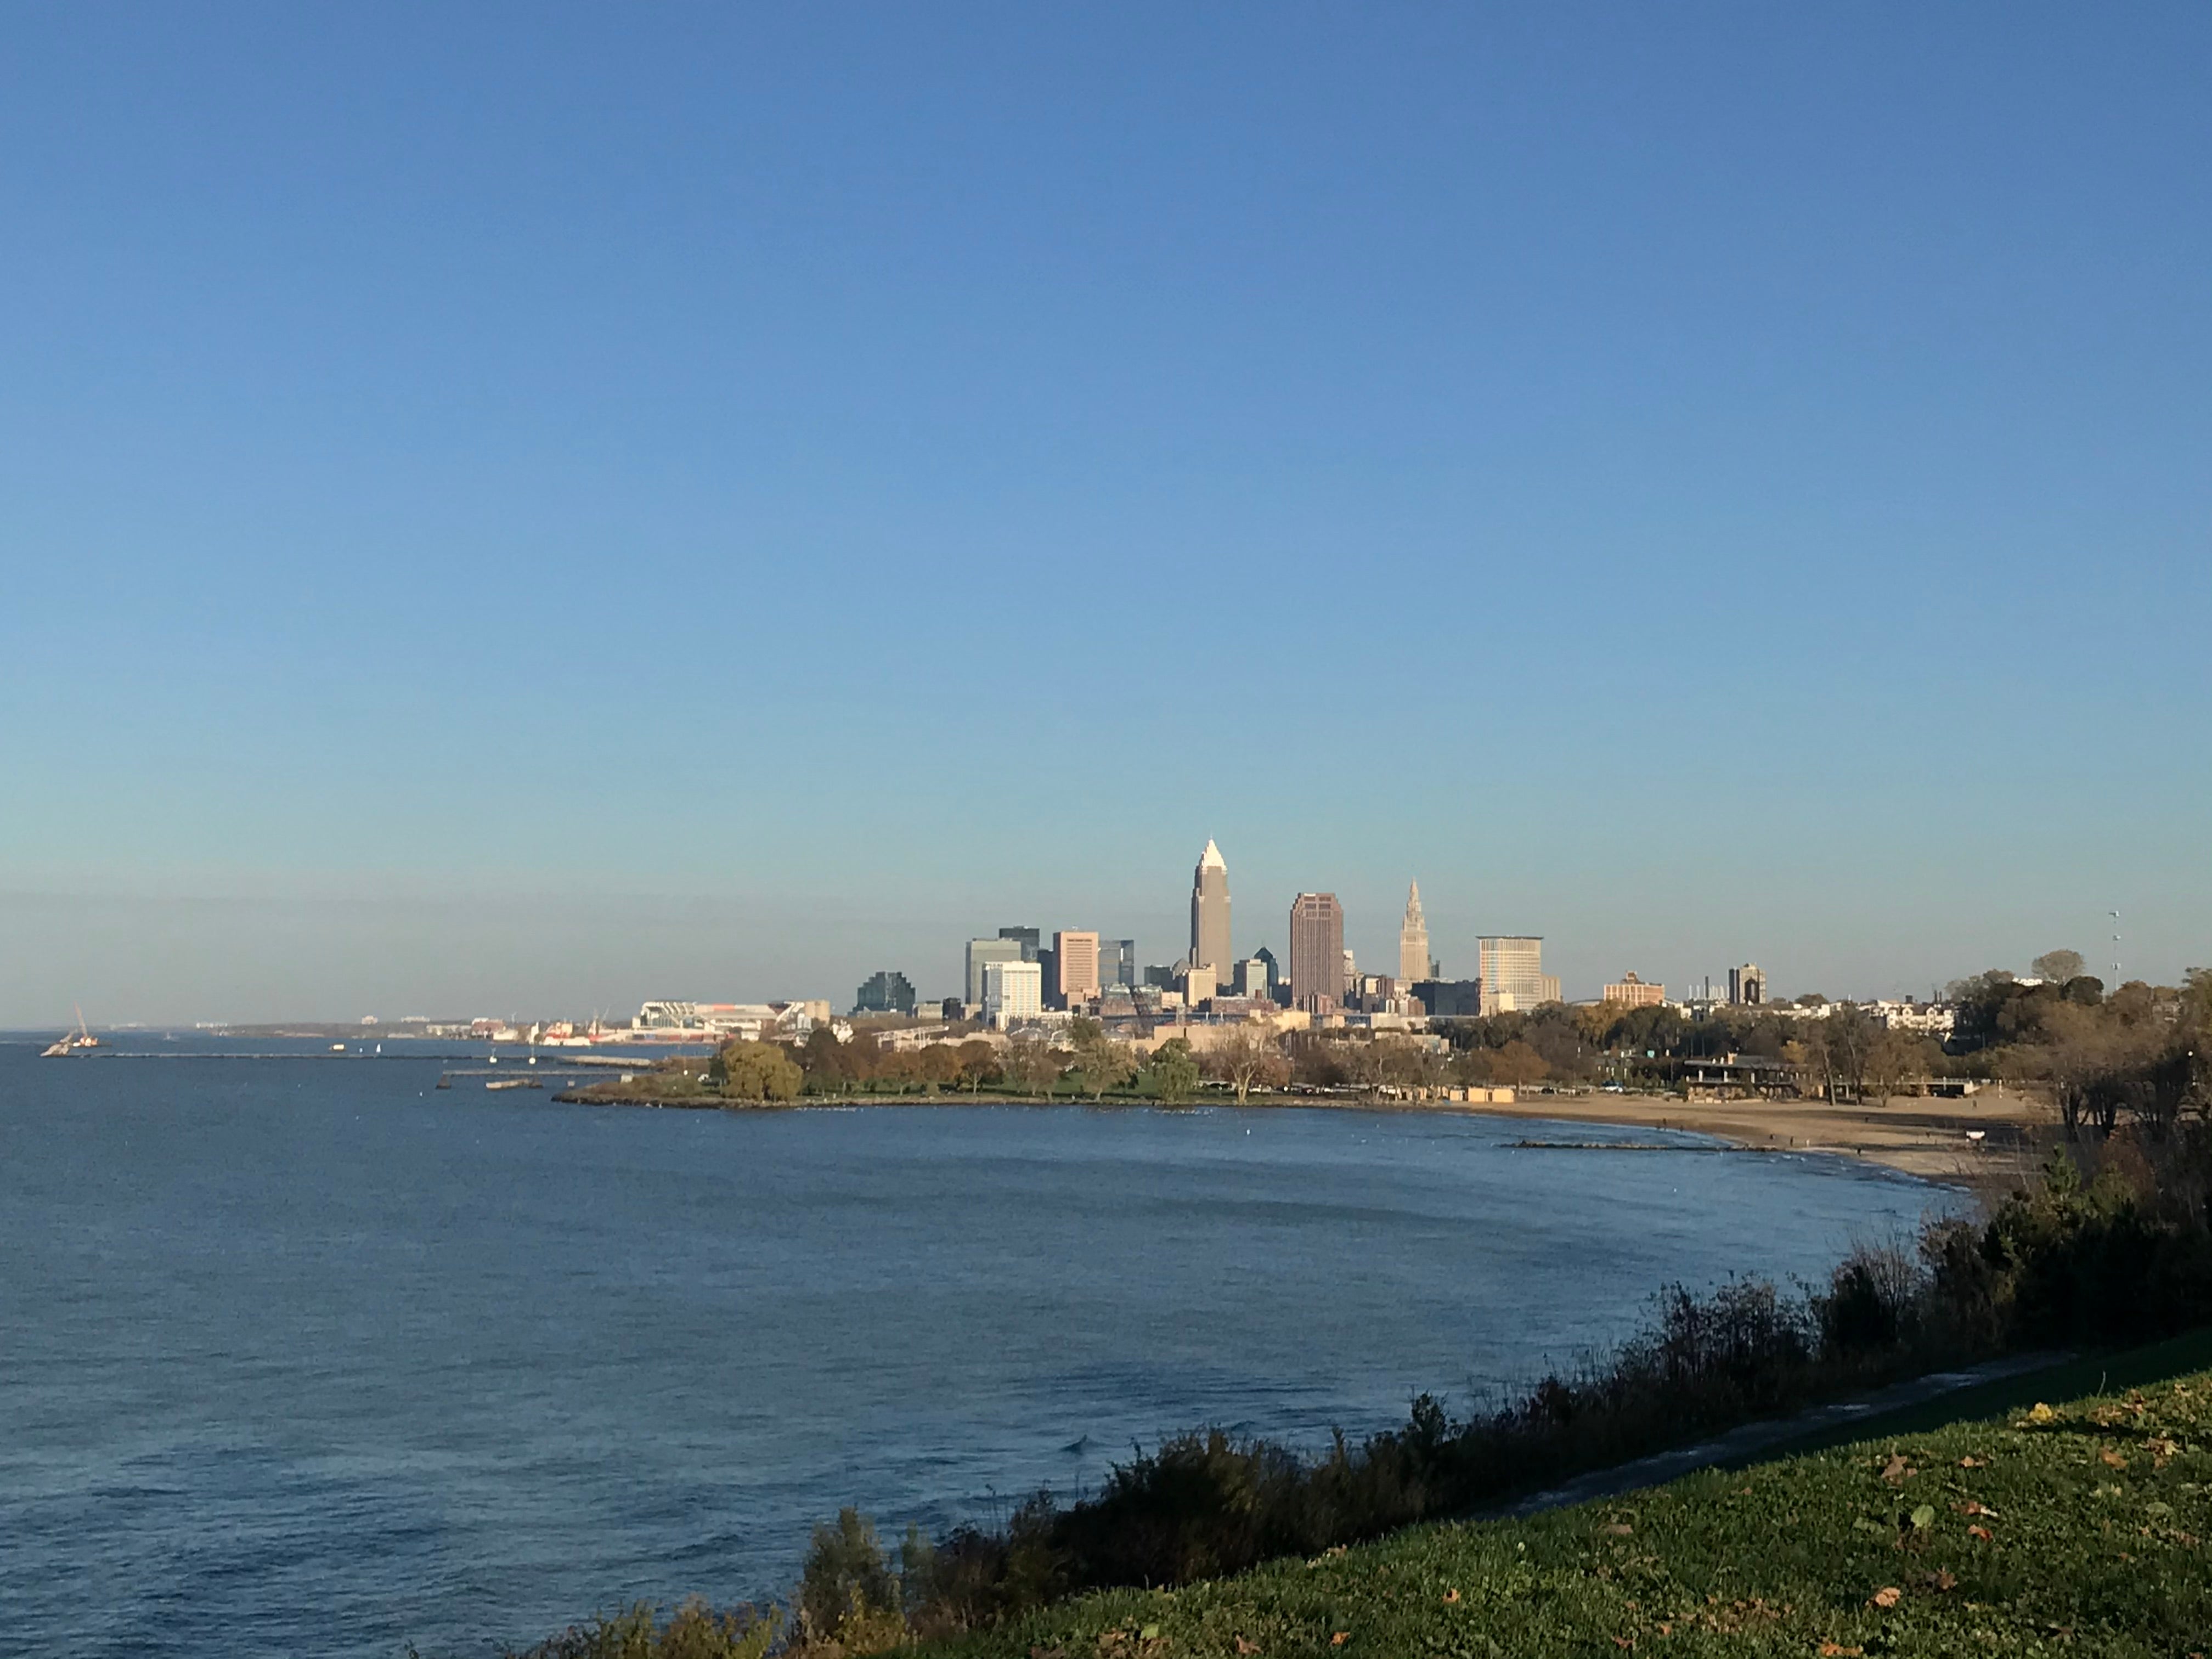 The Cleveland skyline with Lake Erie in the foreground.